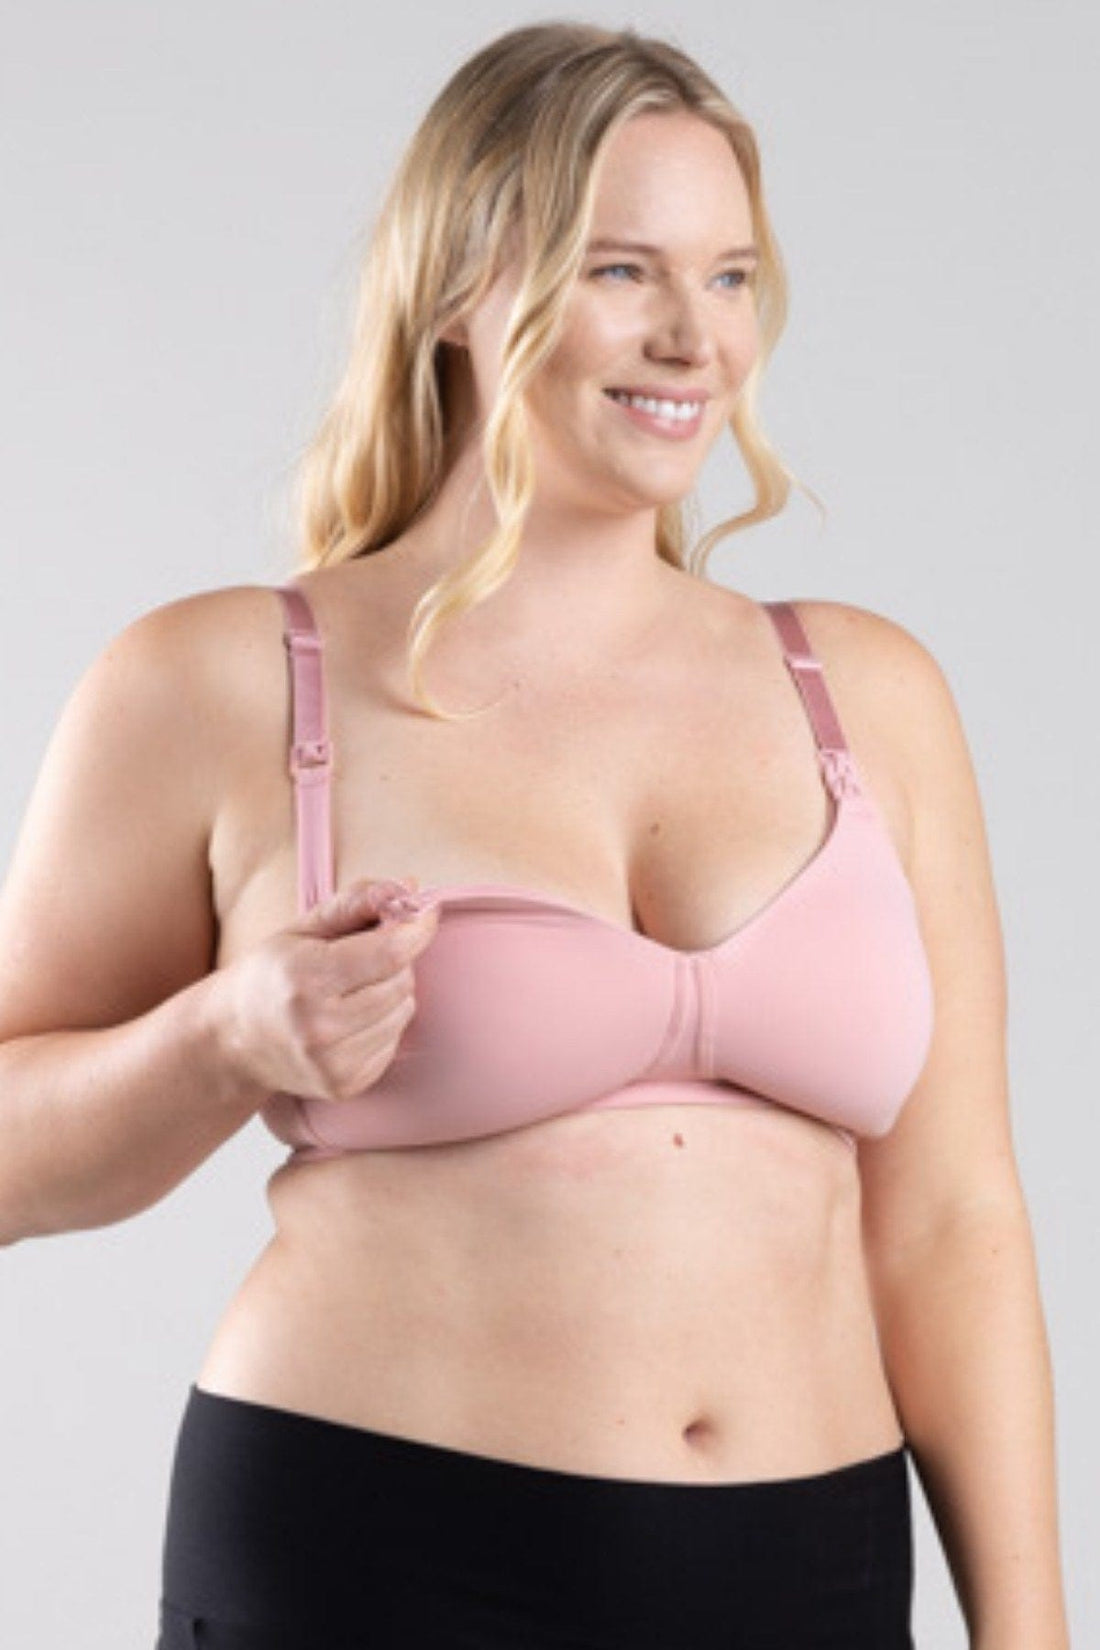 Simple Wishes Supermom All-in-One Bra - Nude 36C, Babies & Kids